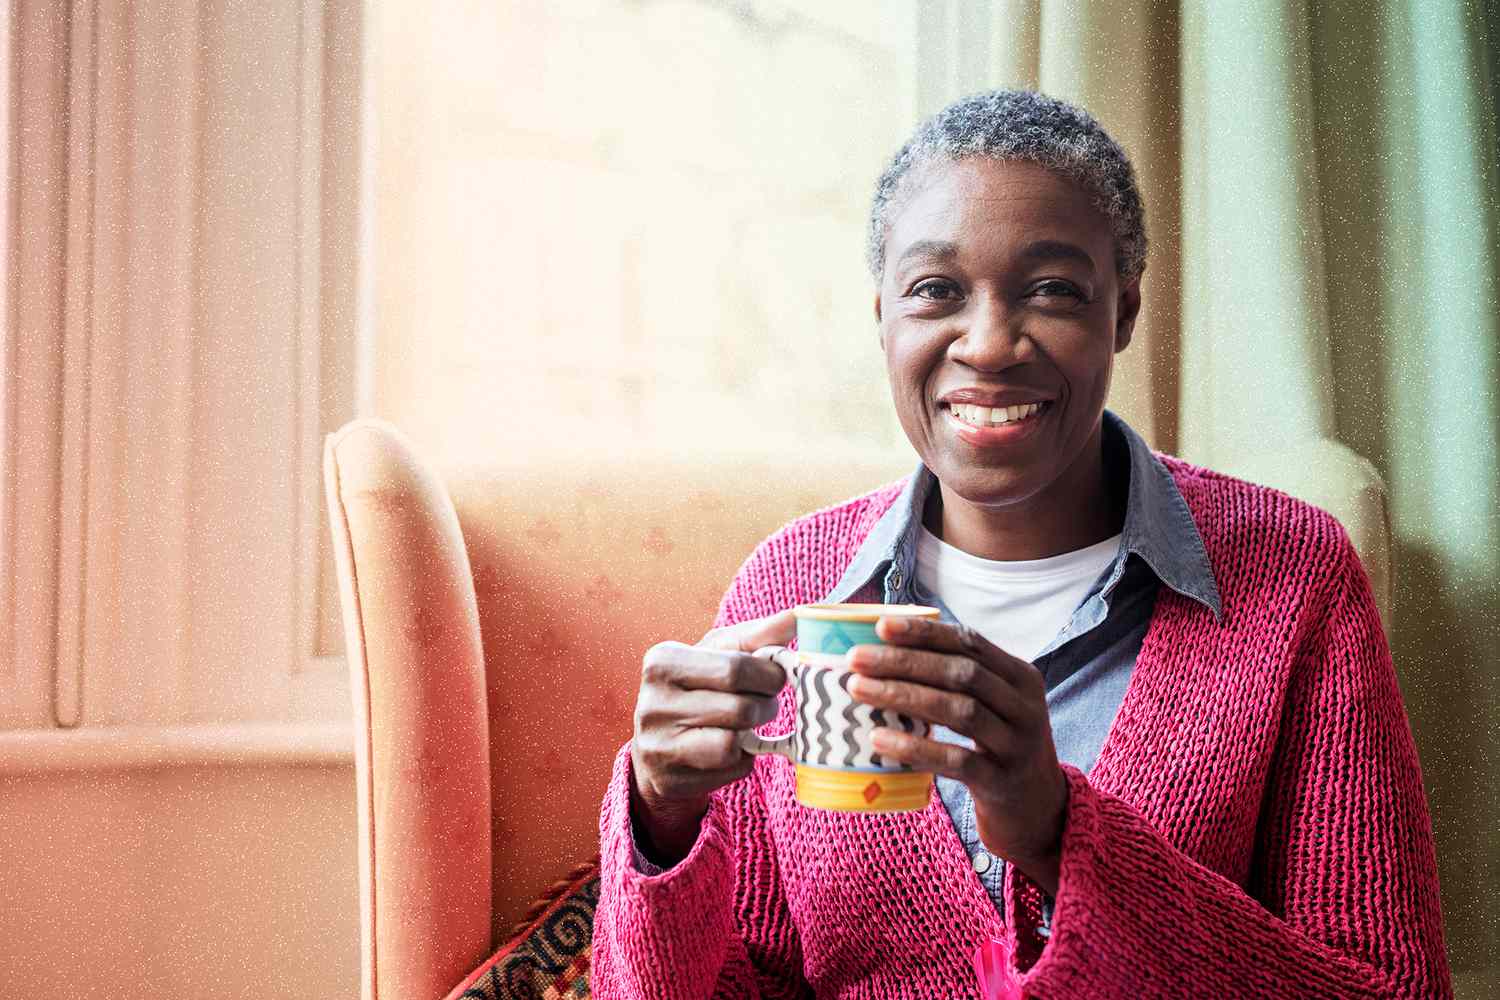 Portrait of cheerful woman holding mug and smiling towards camera